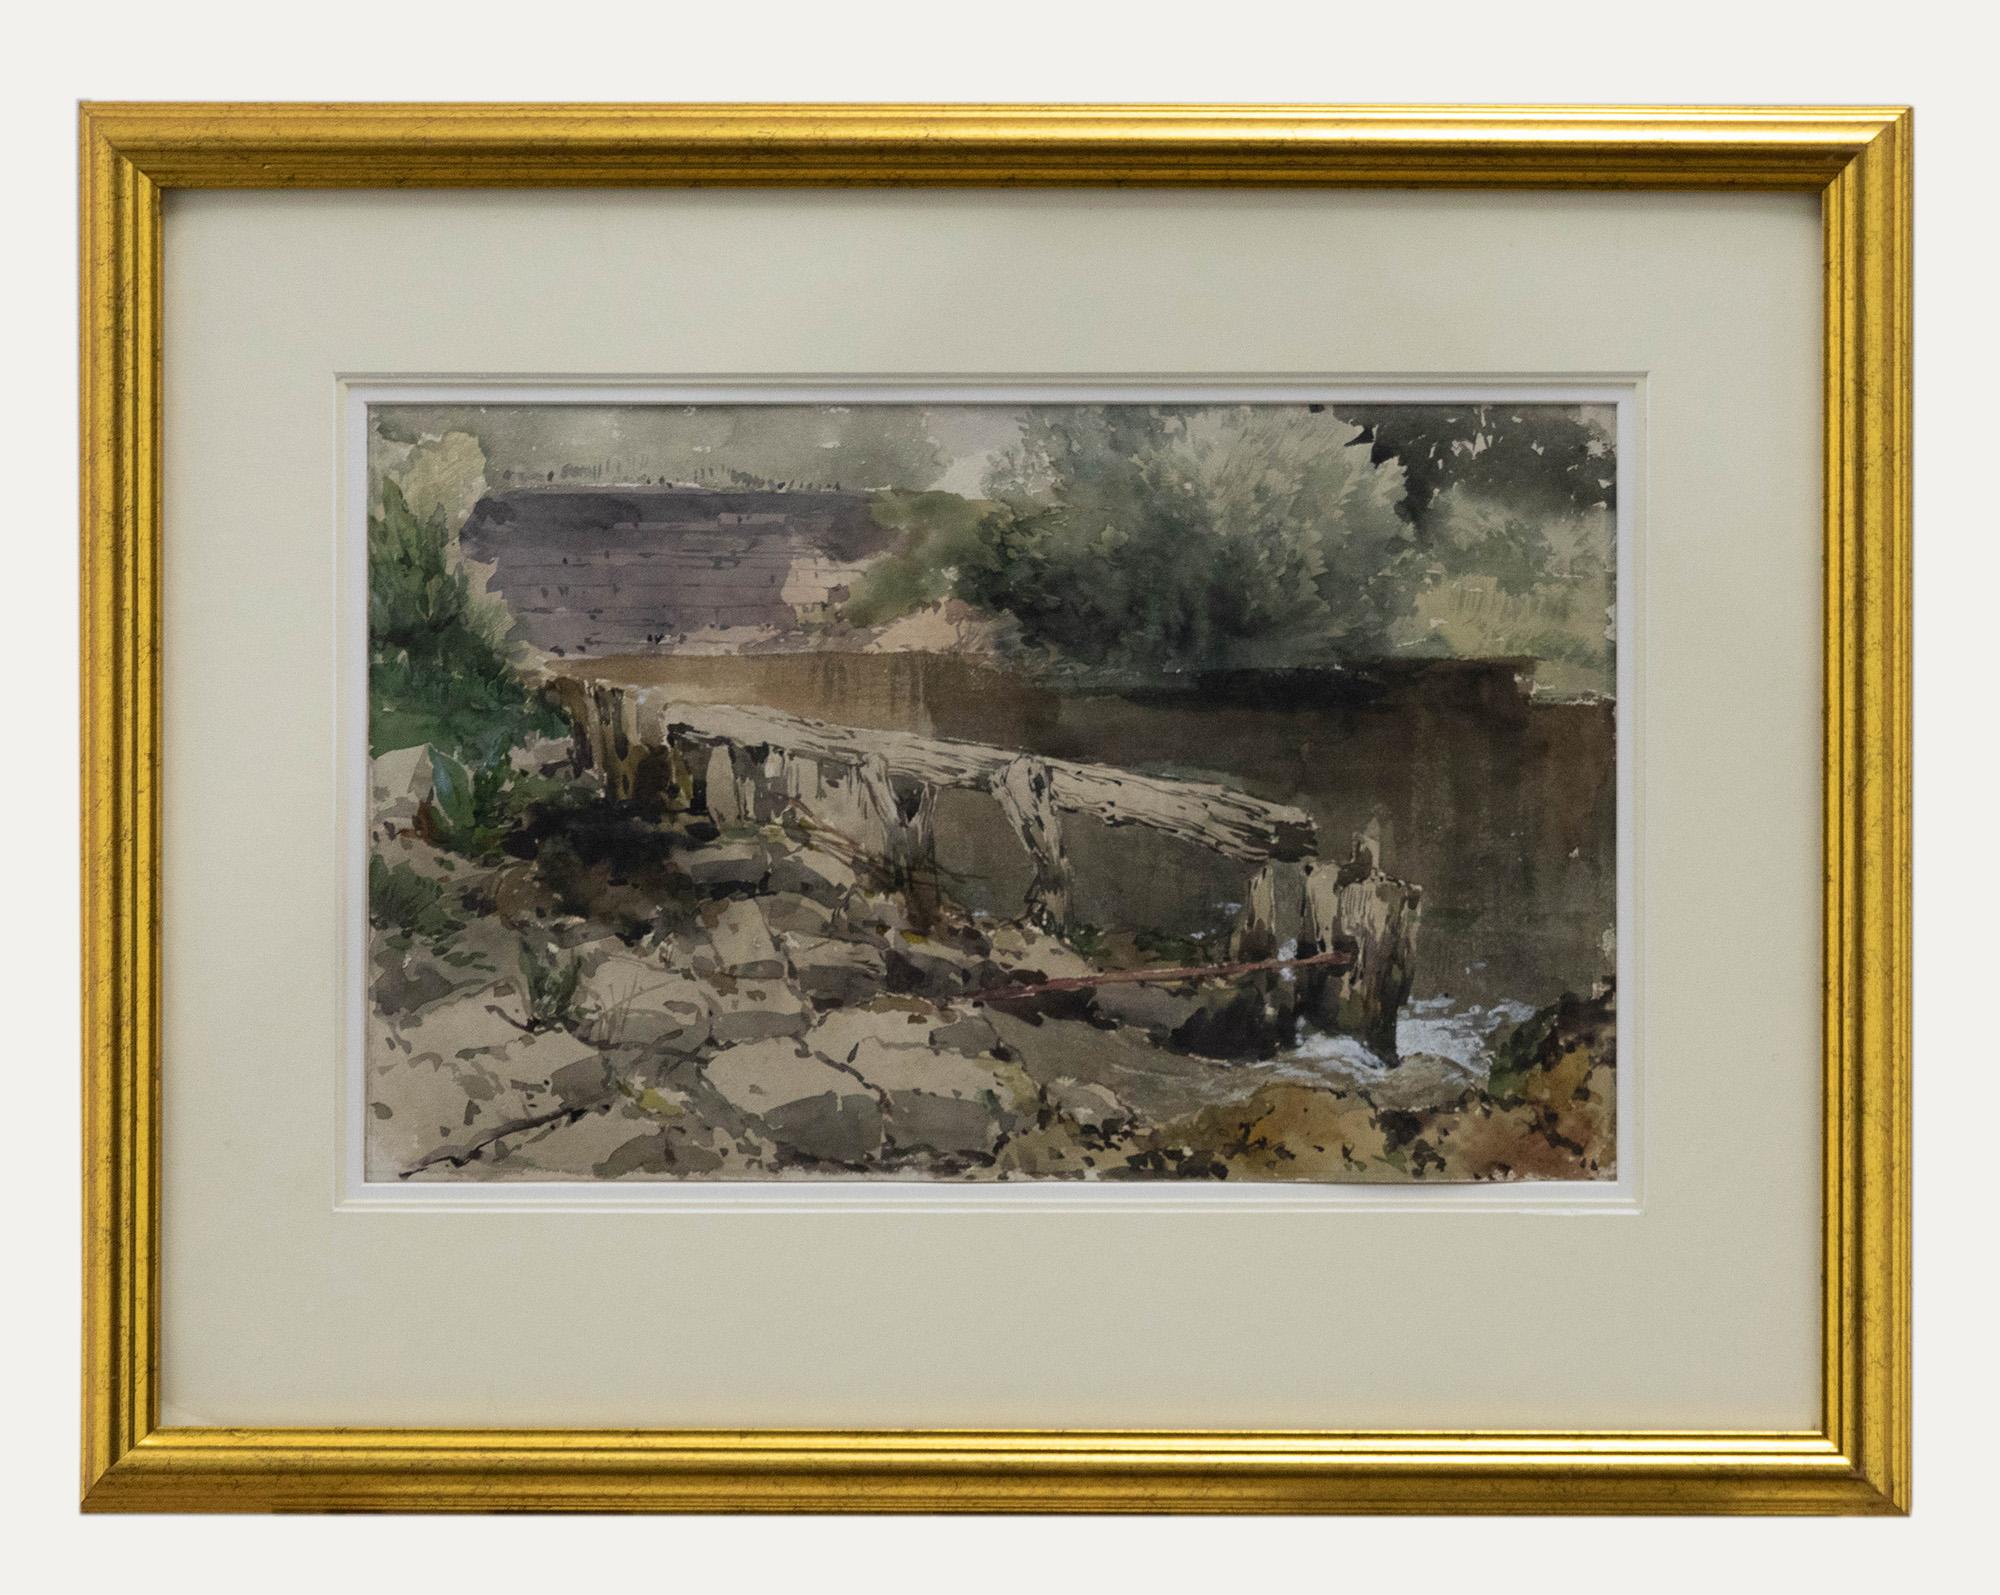 Attributed to William Collingwood Smith - A fine 19th century English School watercolour. Presented in a gilt-effect frame. Unsigned. On watercolour paper.